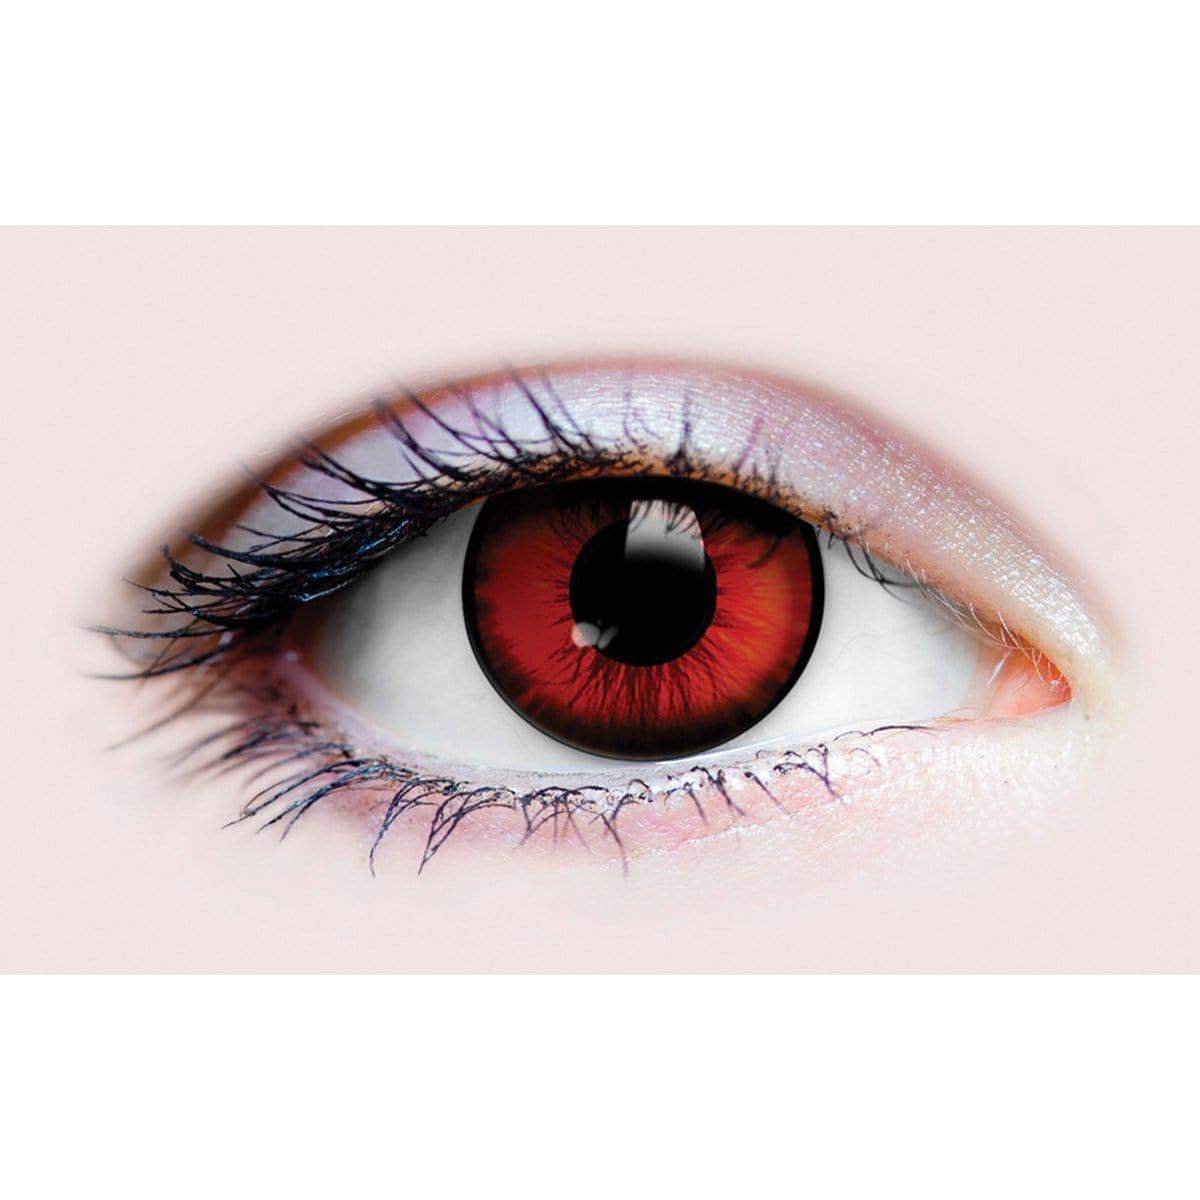 Buy Costume Accessories Dracula I contact lenses, 3 months usage sold at Party Expert